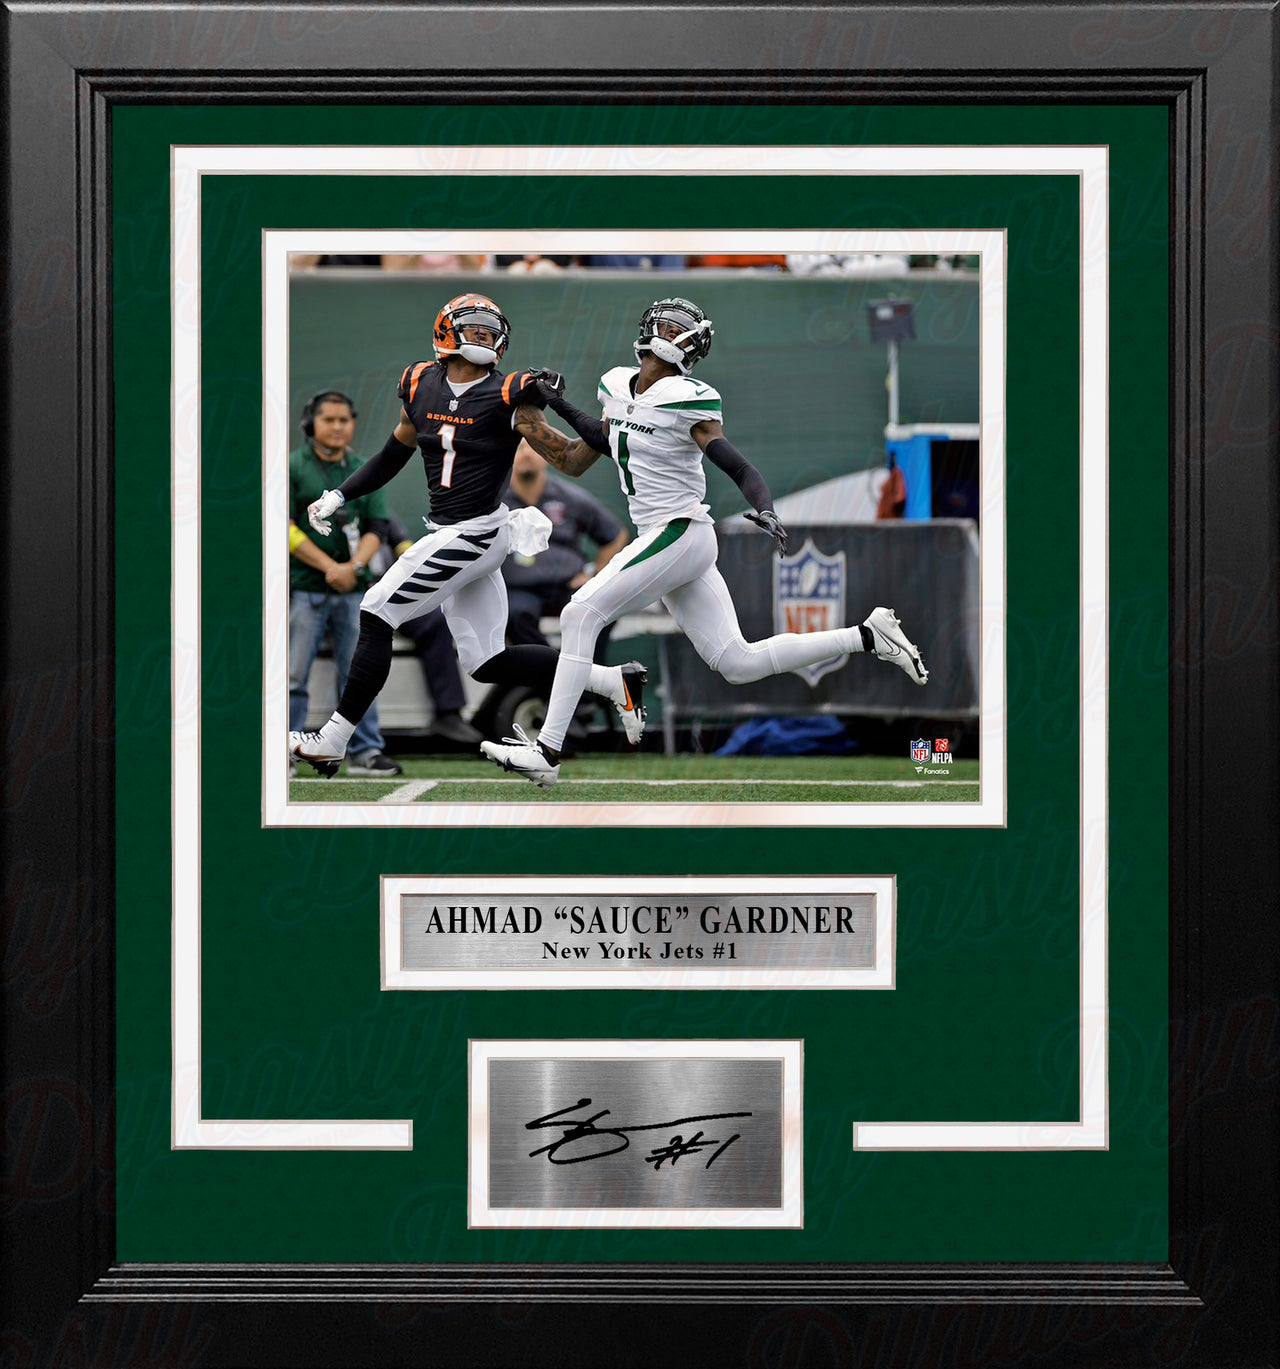 Ahmad 'Sauce' Gardner in Action New York Jets 8" x 10" Framed Football Photo with Engraved Autograph